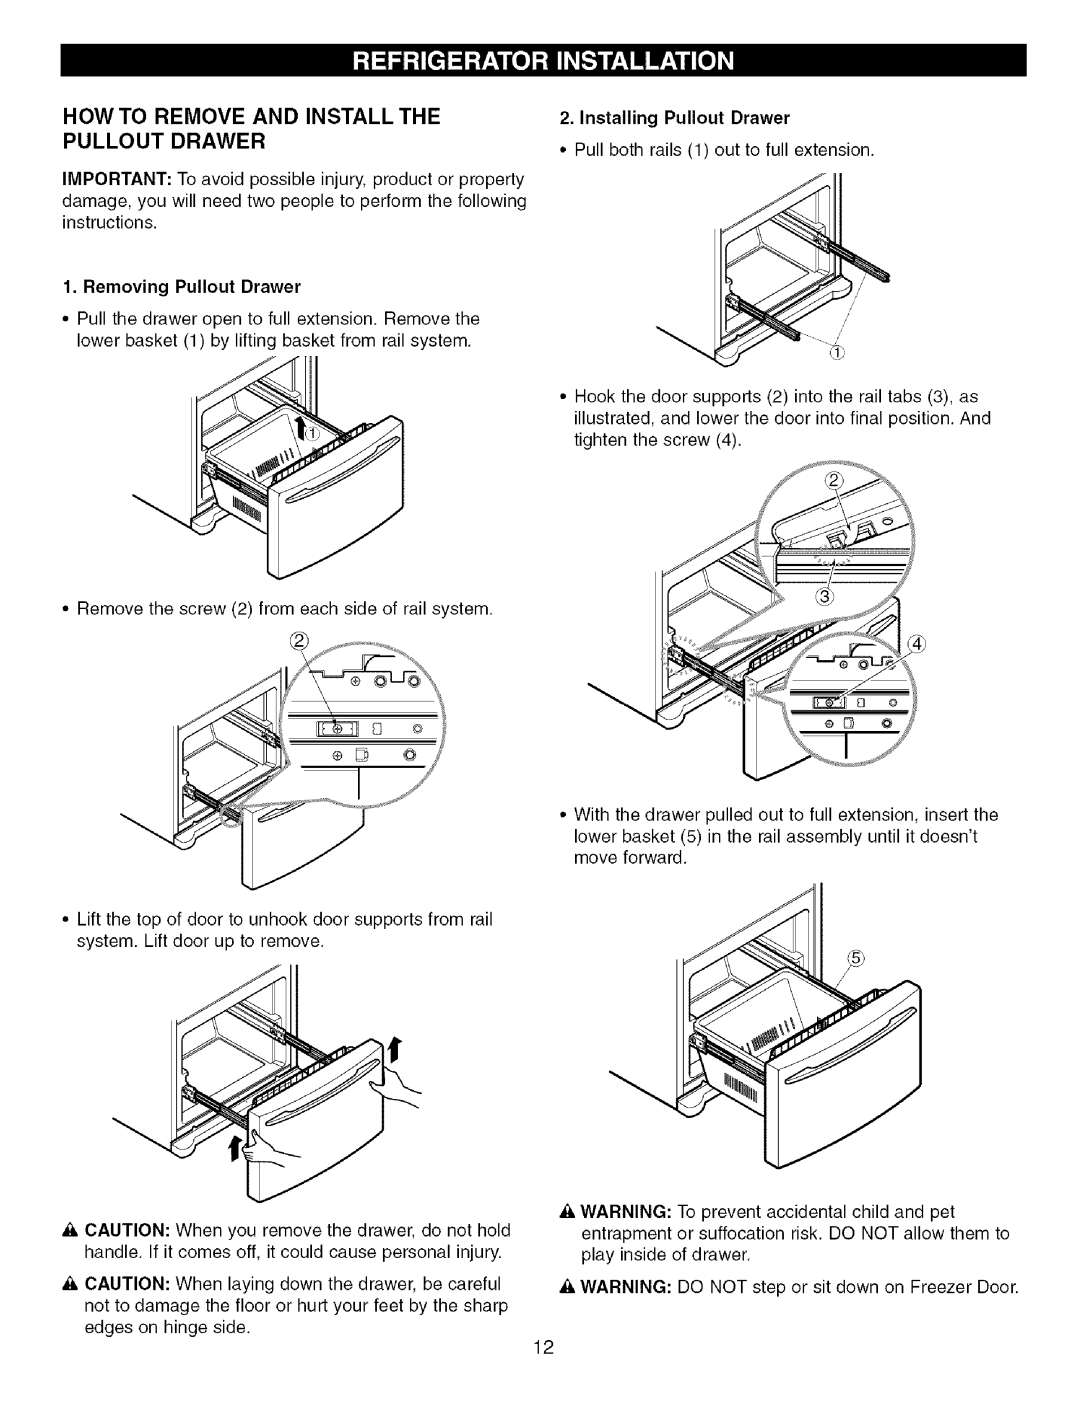 Kenmore 795.755524, 795.755594, 795.755544, 795.755534 How To Remove And Install The Pullout Drawer, Removing Pullout Drawer 